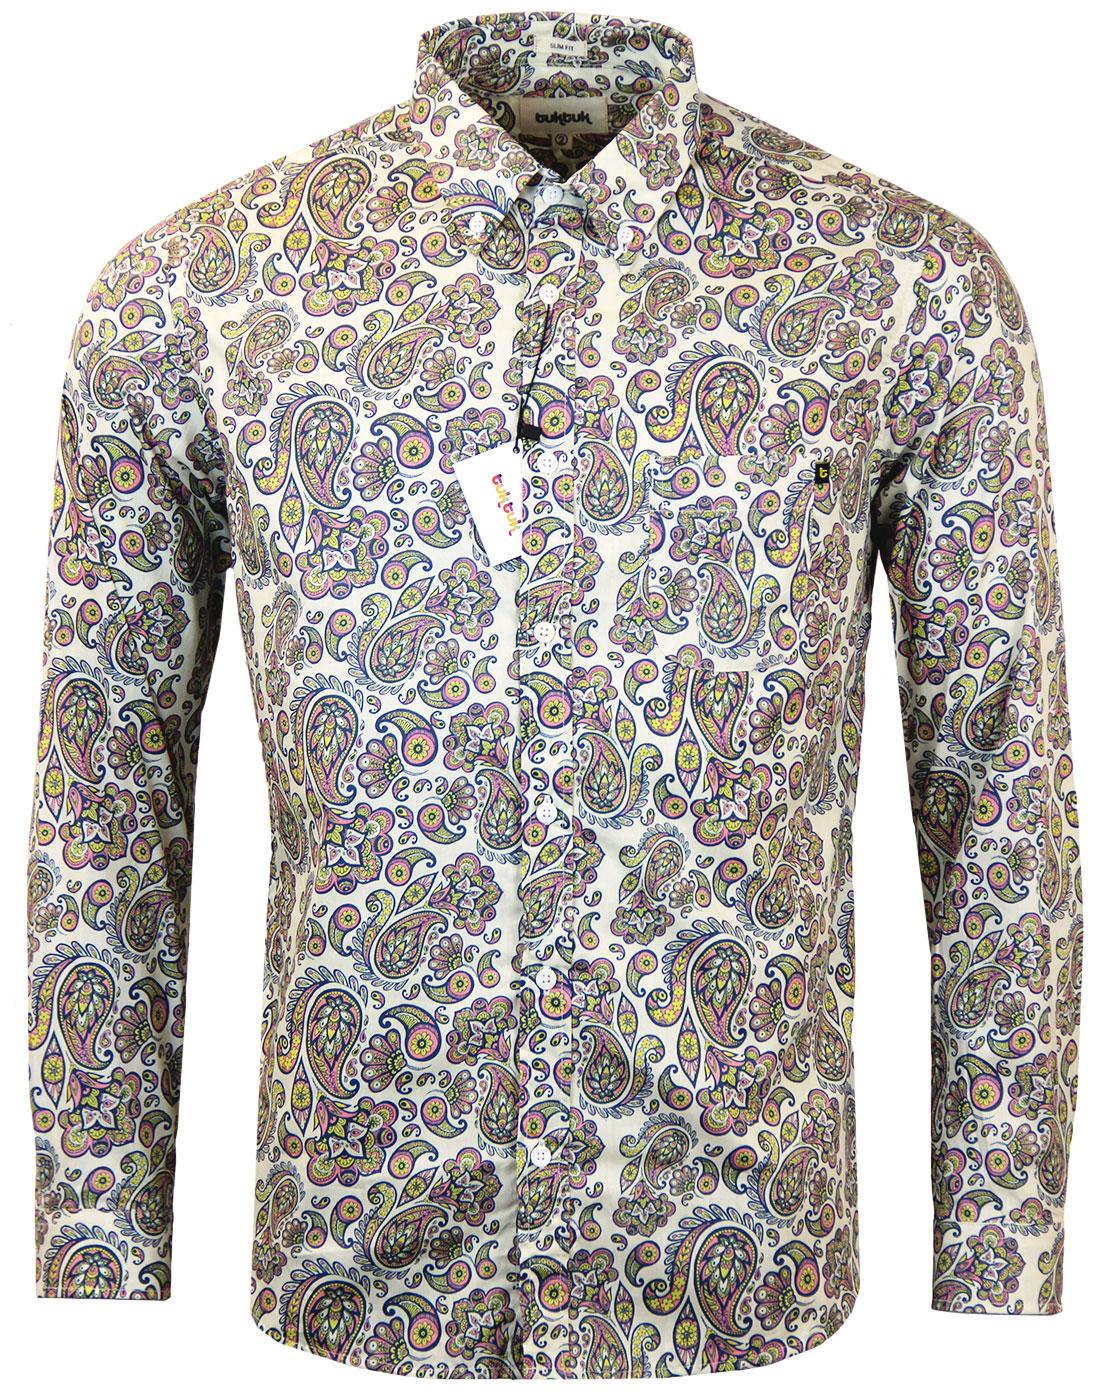 TUKTUK Retro 1960s Mod Floral Psychedelic Paisley Shirt in Stone